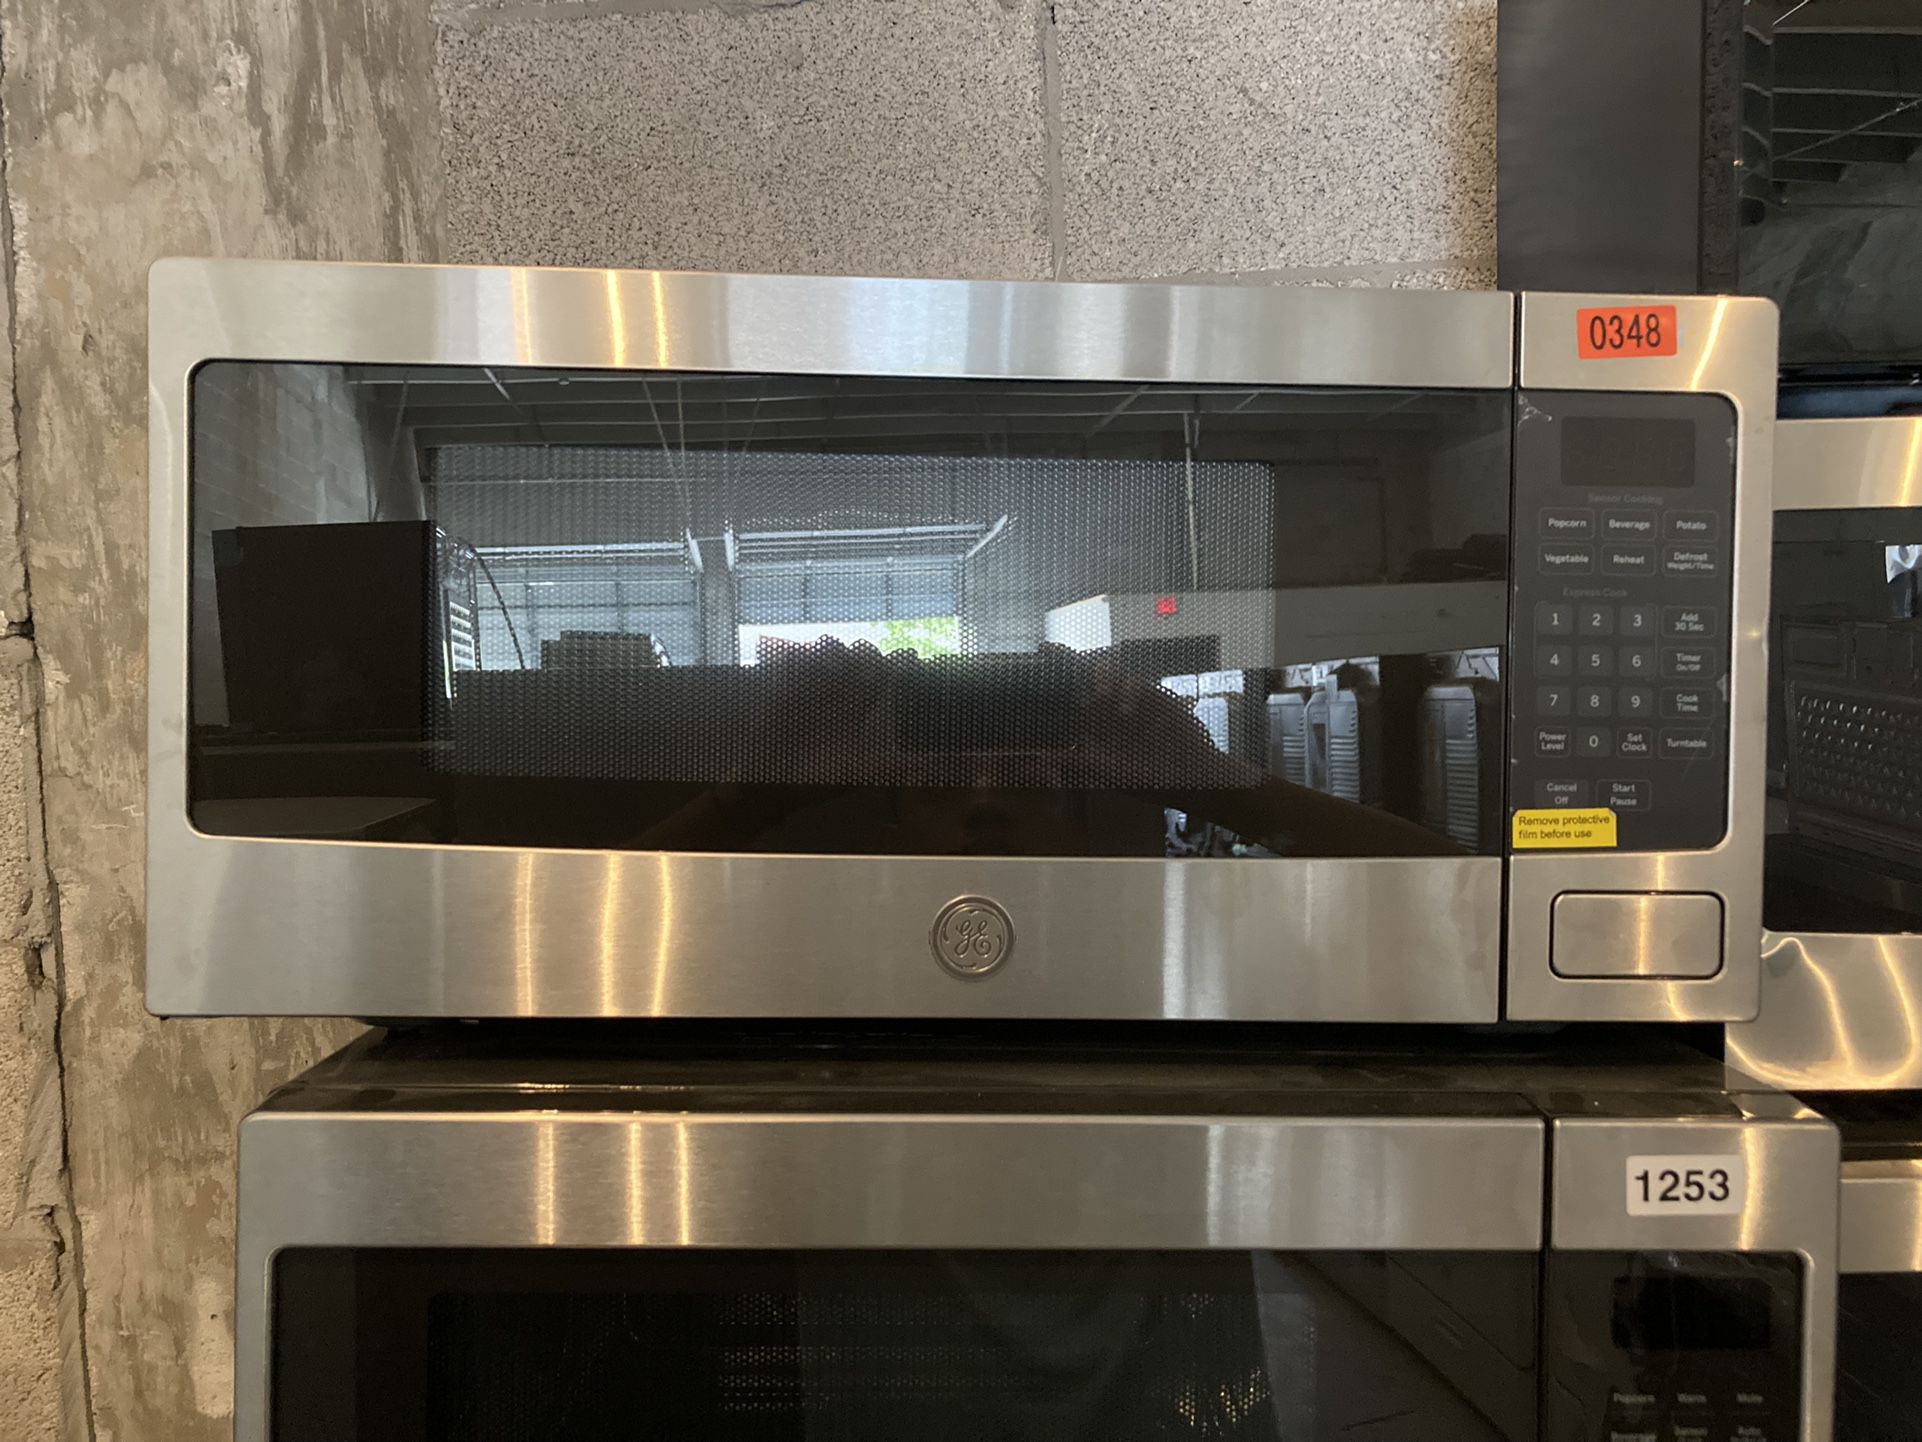 GE 24” - 1.6 Cu. Ft. Microwave with Sensor Cooking - Stainless steel $125